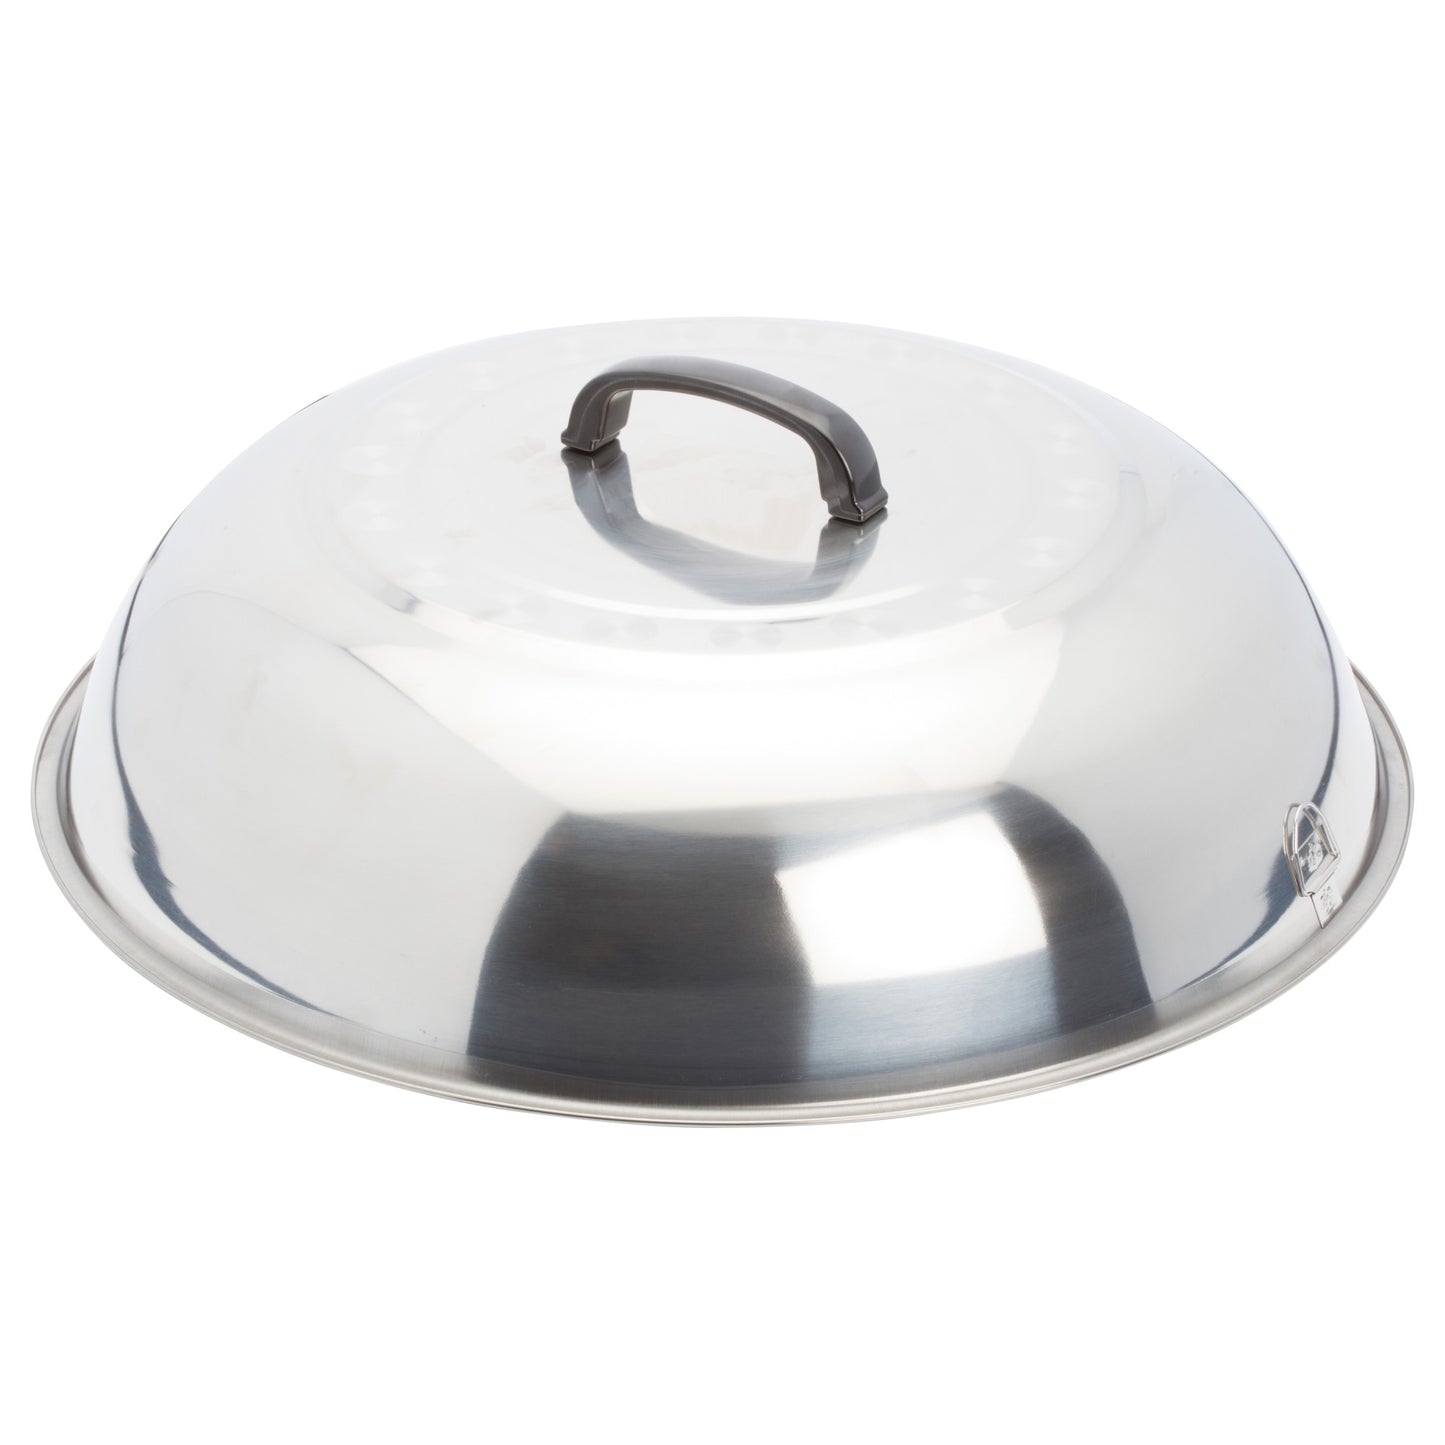 WKCS-18 - Stainless Steel Wok Cover - 17-3/4"